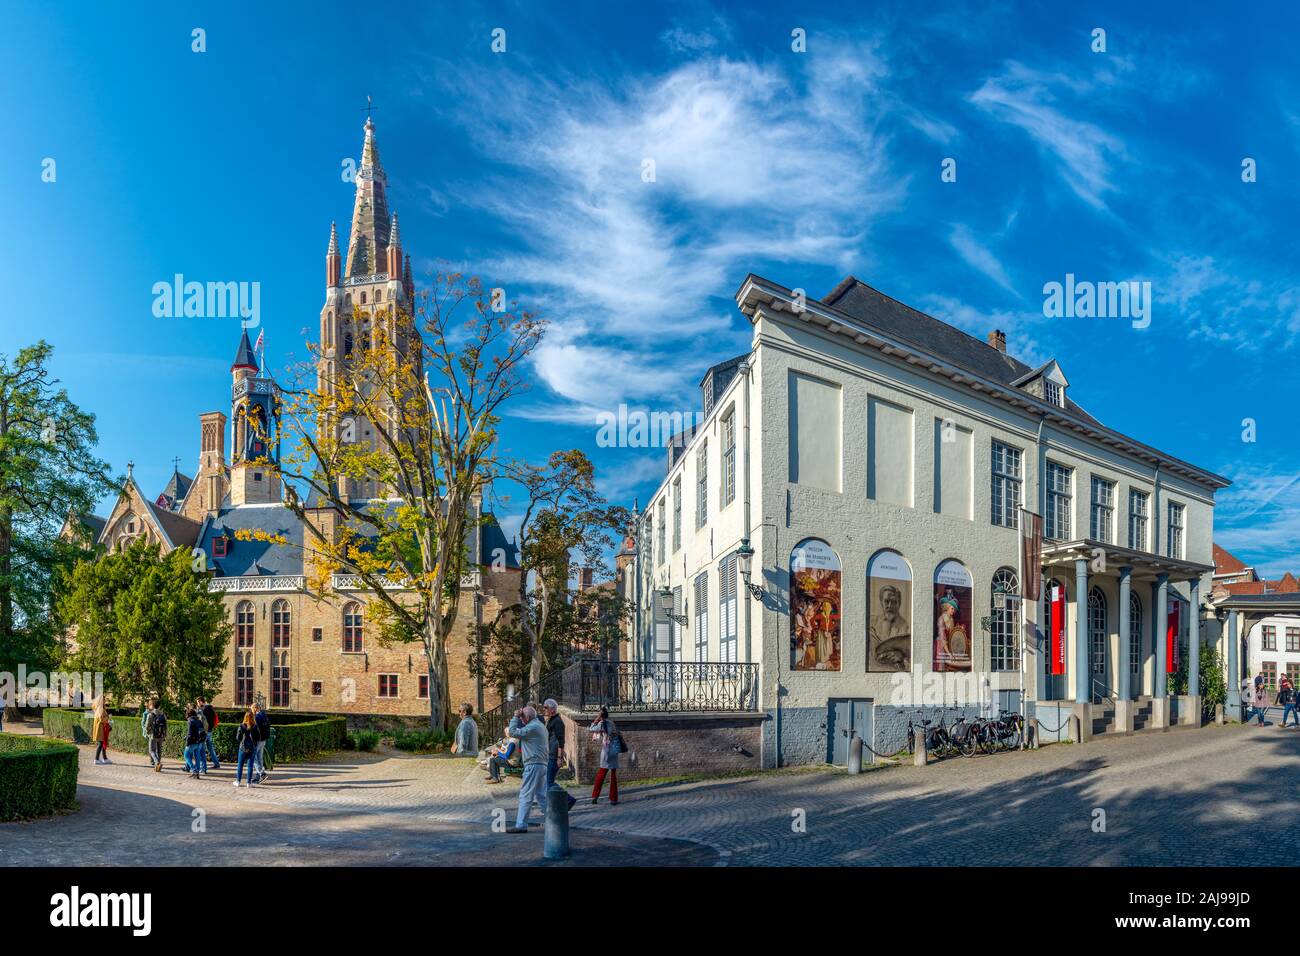 Bruges, Belgium - October 6, 2018: Arentshuis is a neoclassical building from the last quarter of the 18th century, and is now a museum about painting Stock Photo